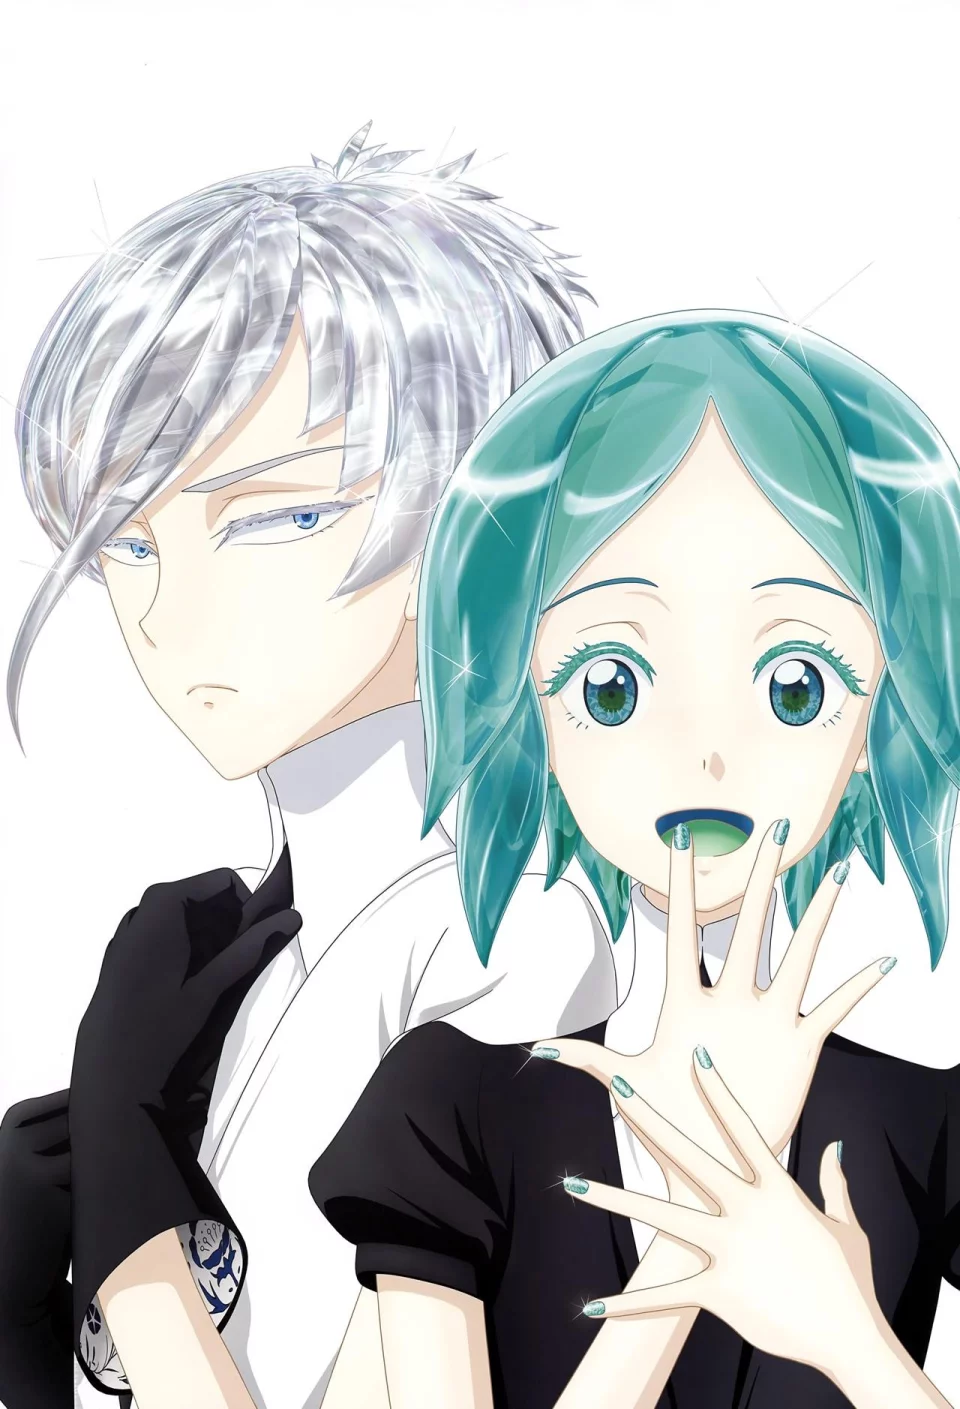 The story of Houseki no Kuni is coming to an end